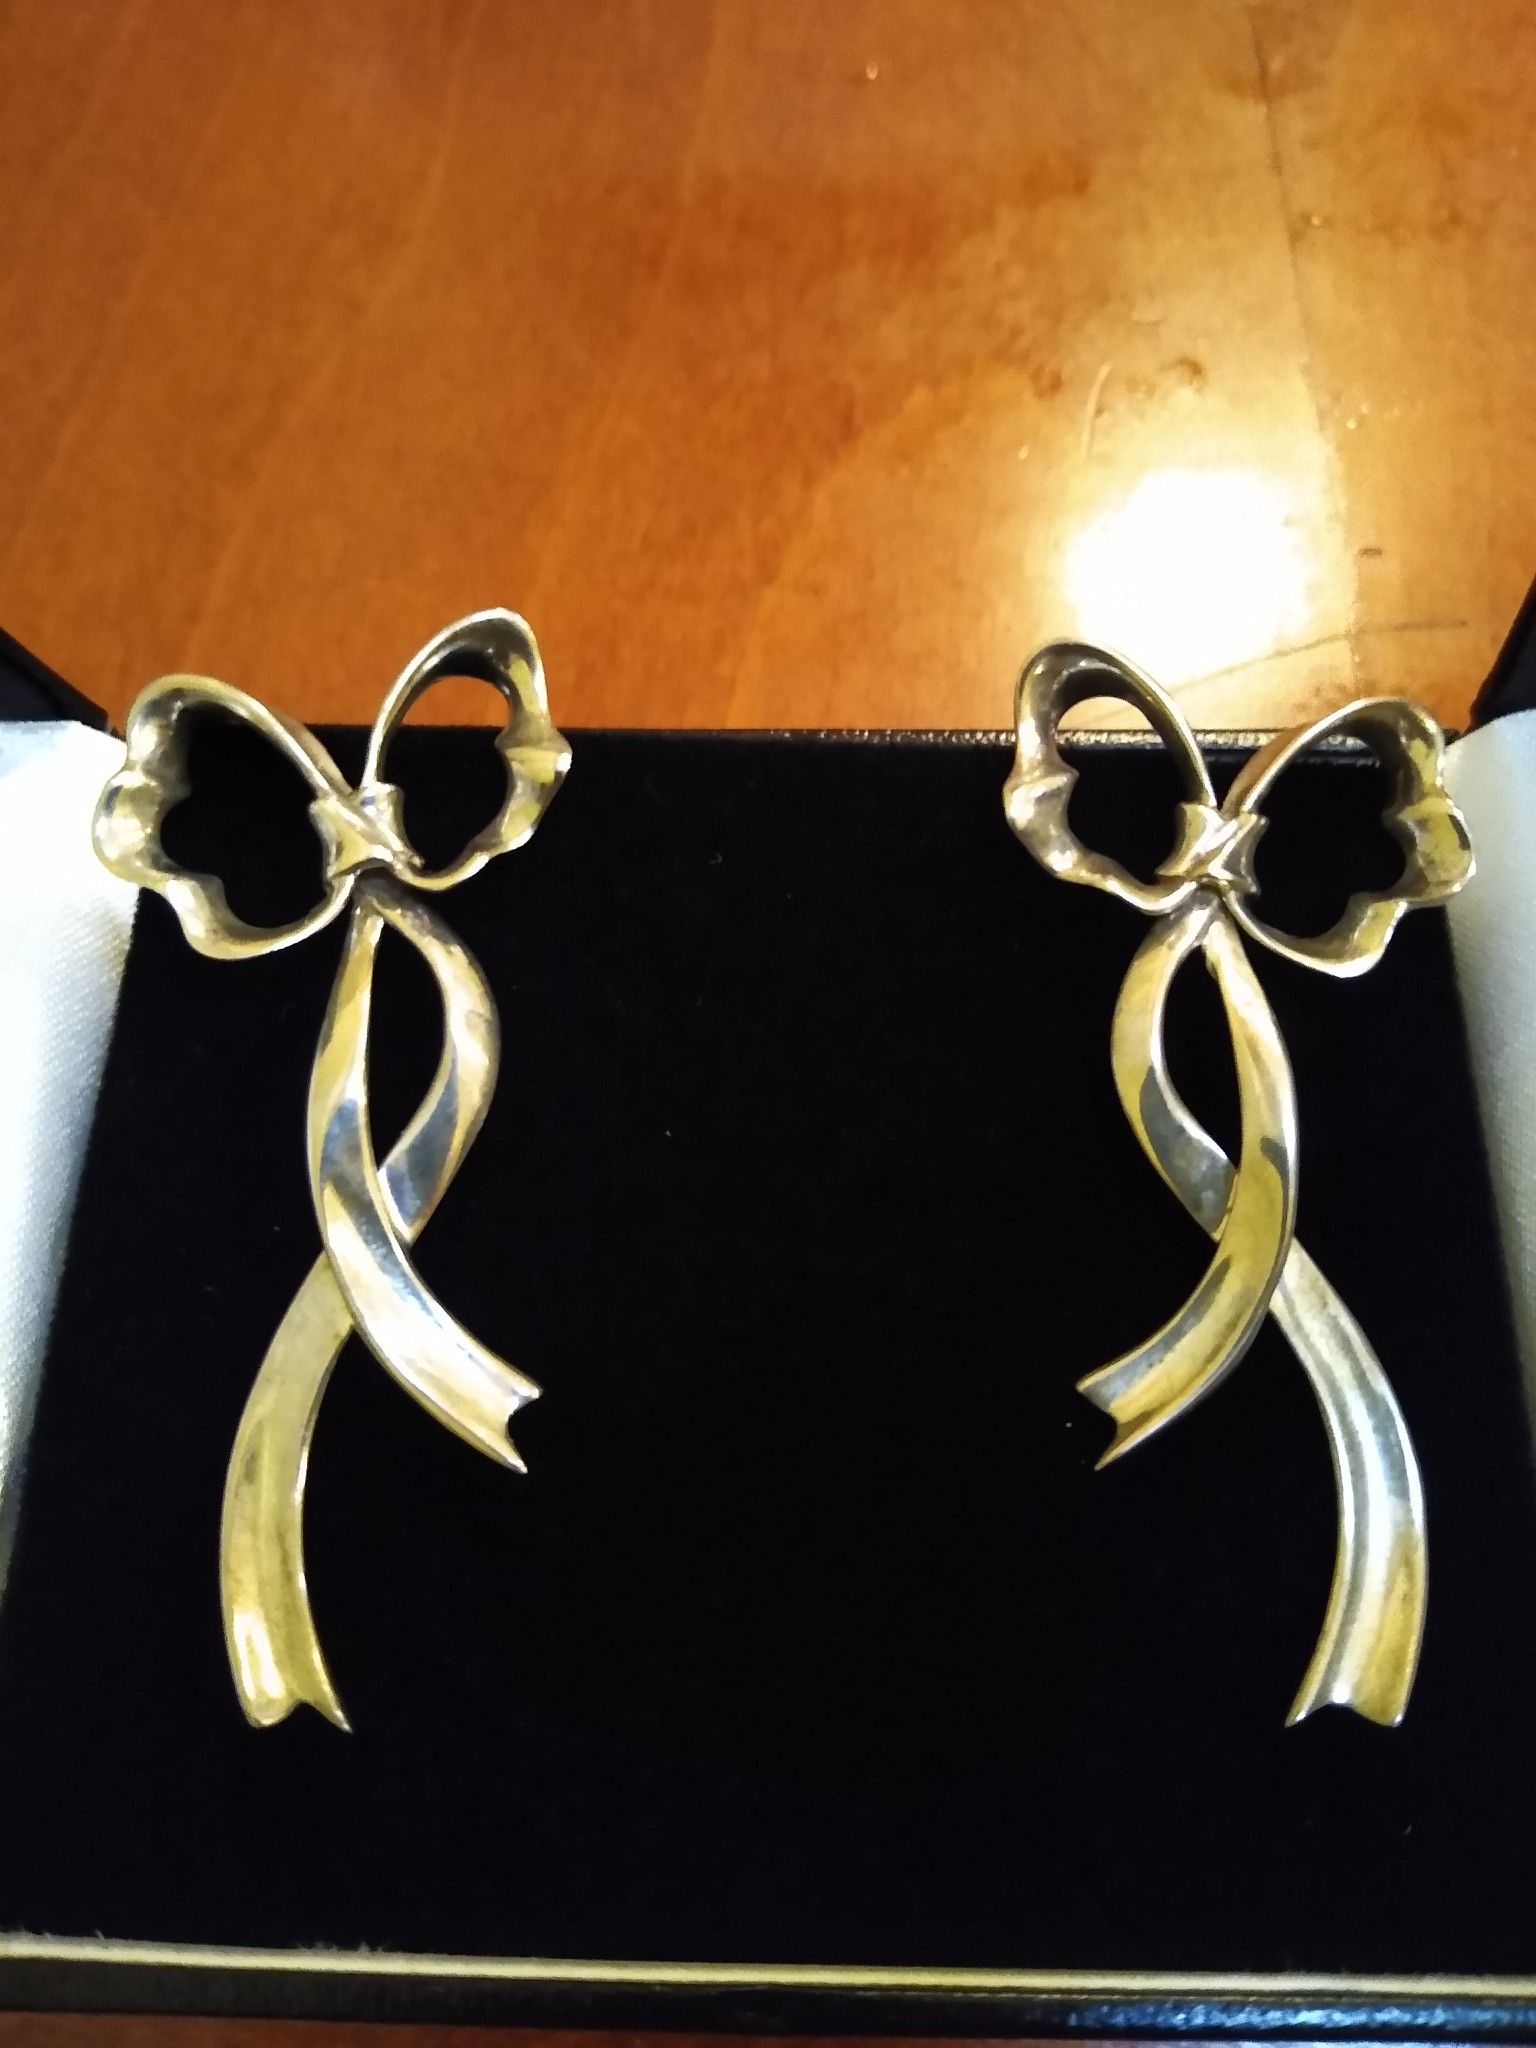 Authentic vintage Tiffany & Co. Ribbon earrings